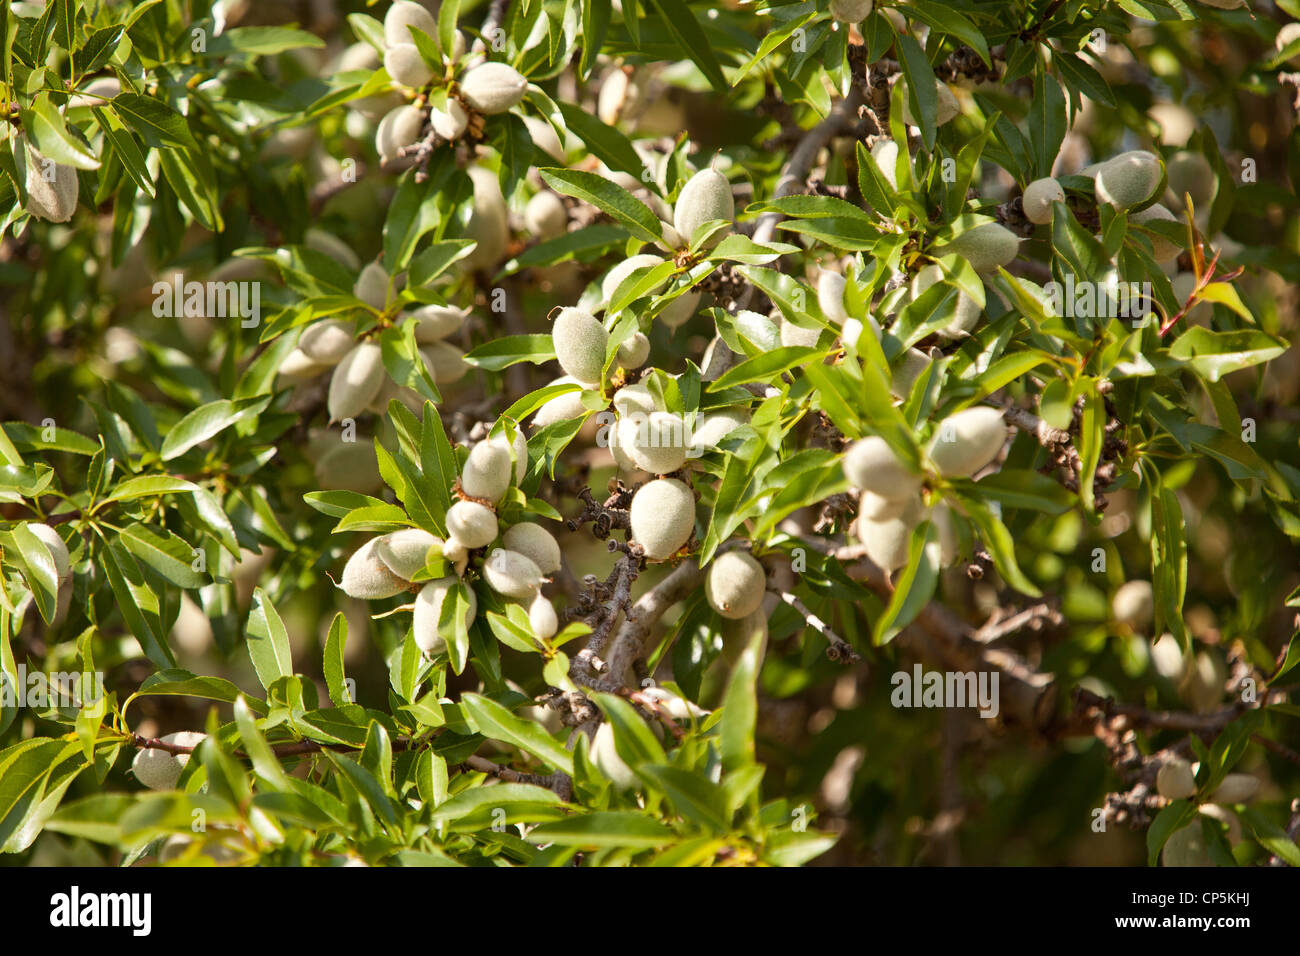 Almond fruits on branch Stock Photo